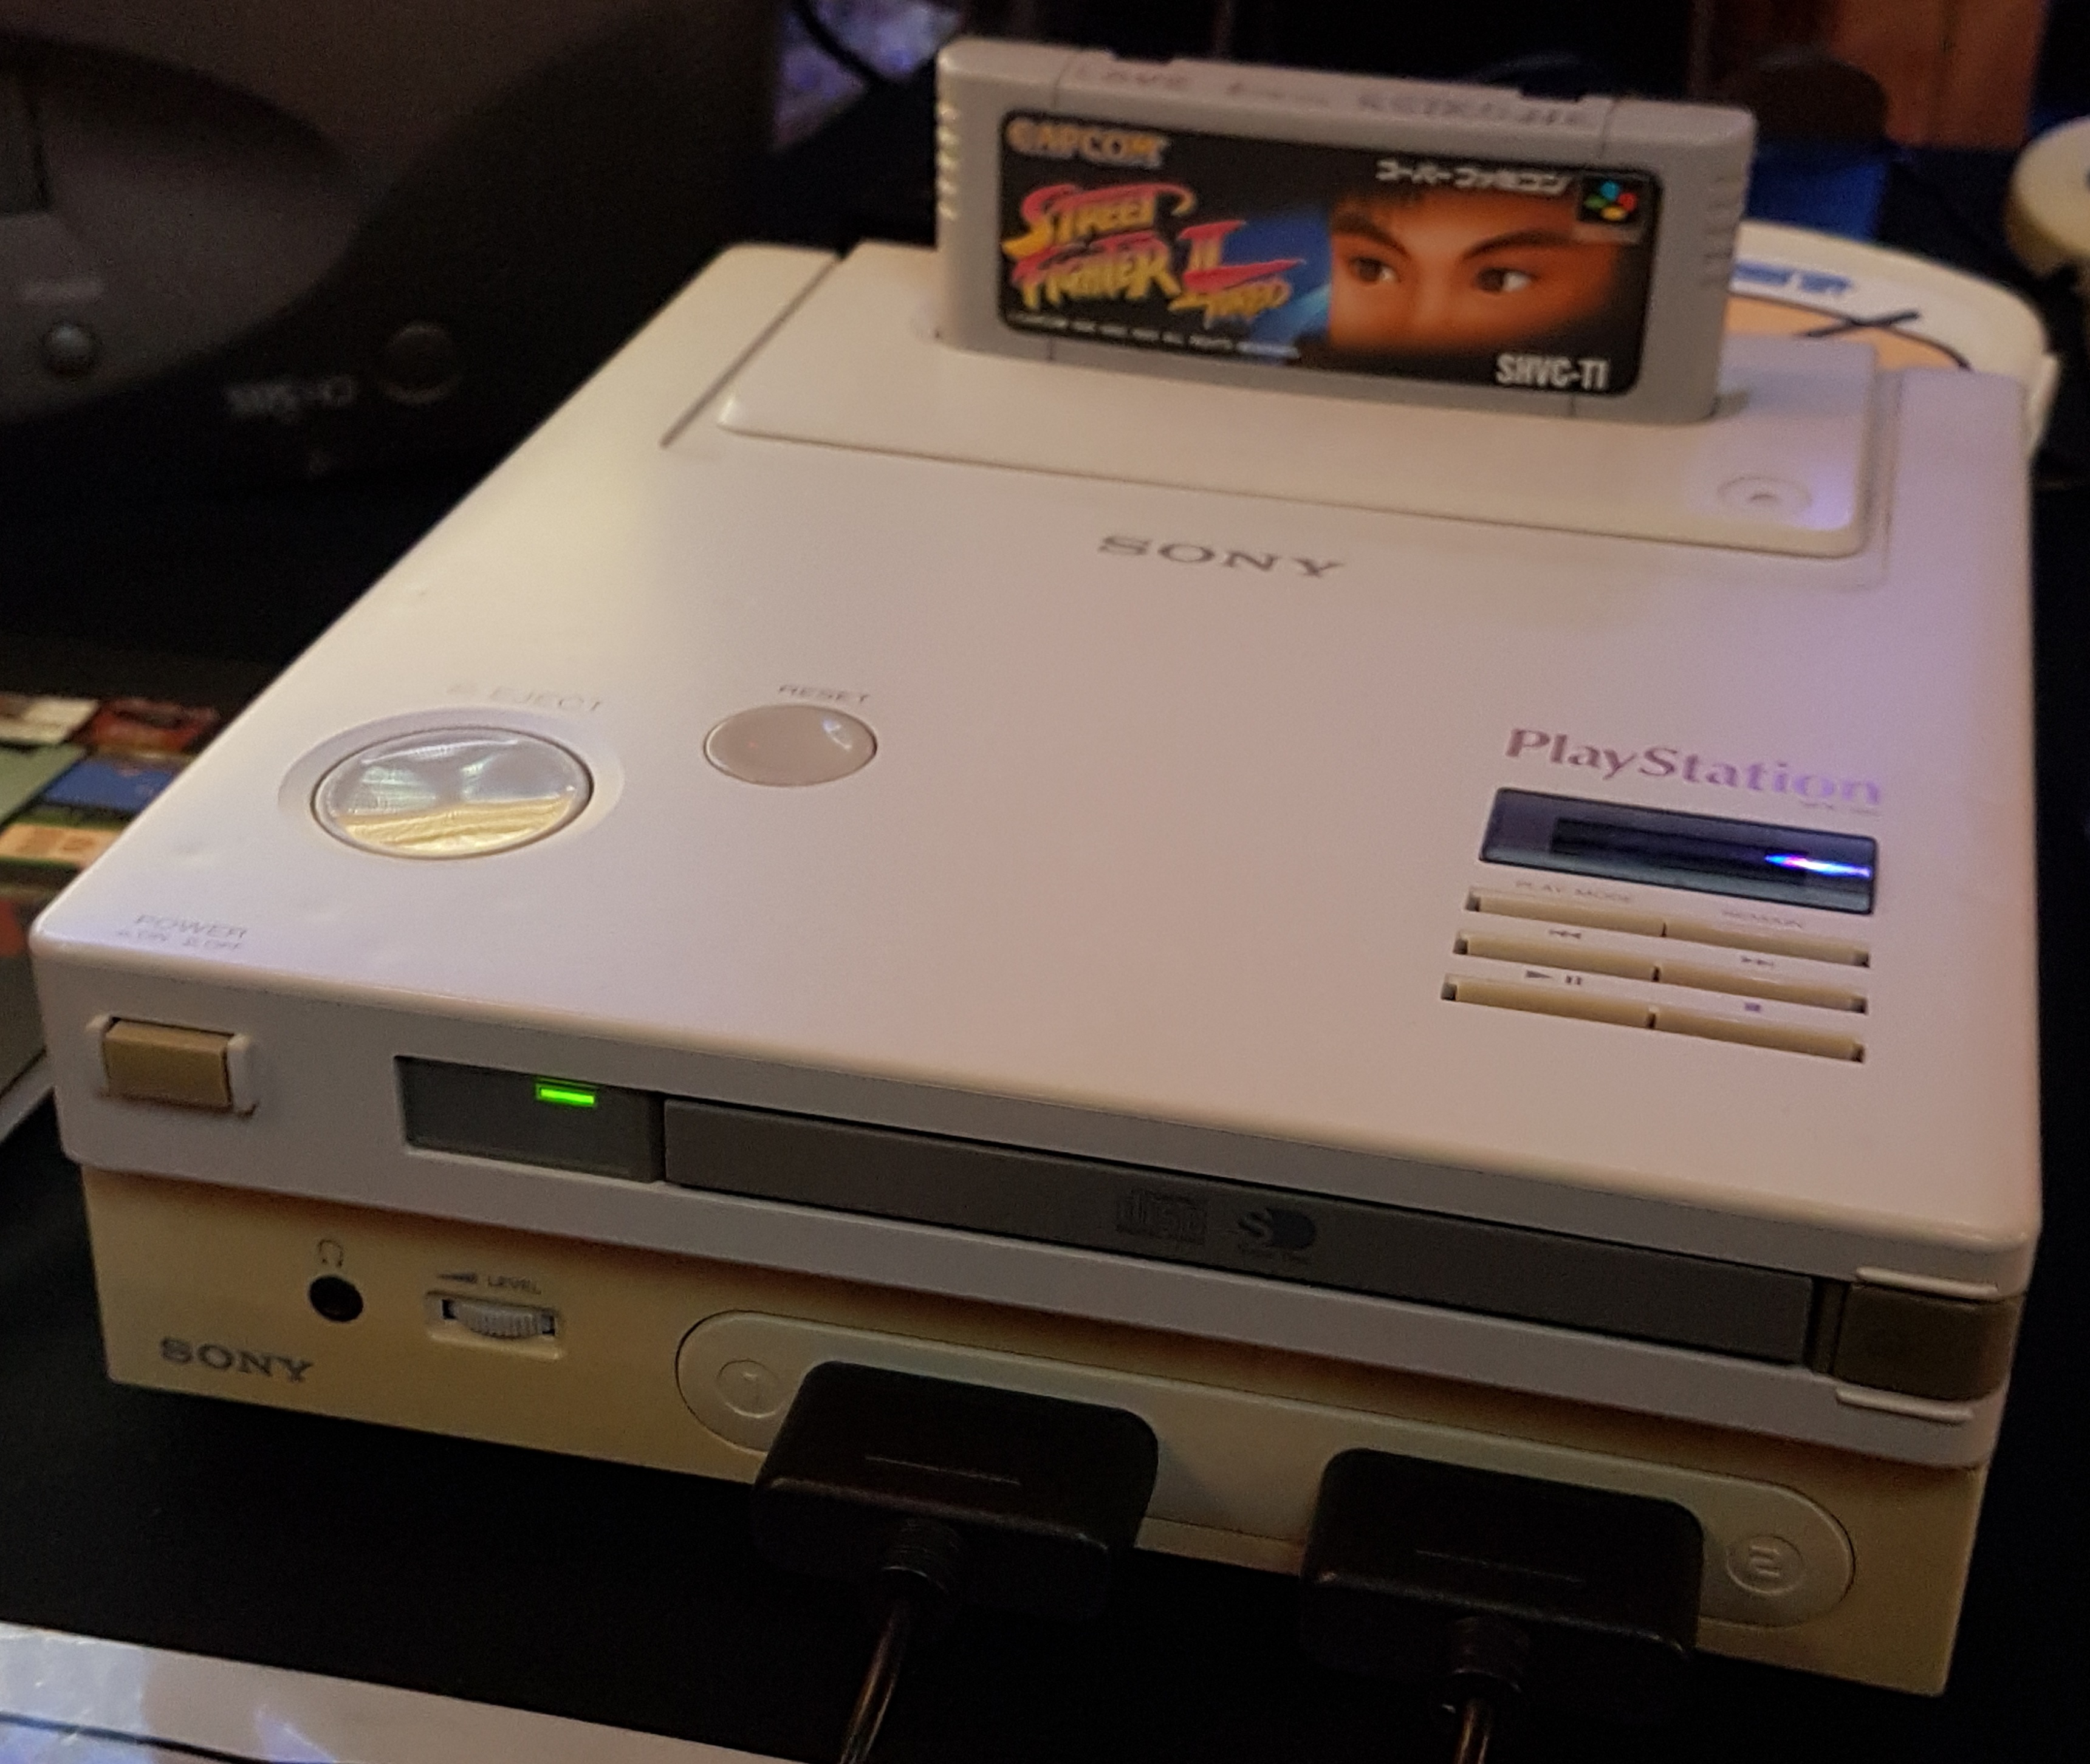 Nintendo PlayStation prototype sold for $360 000